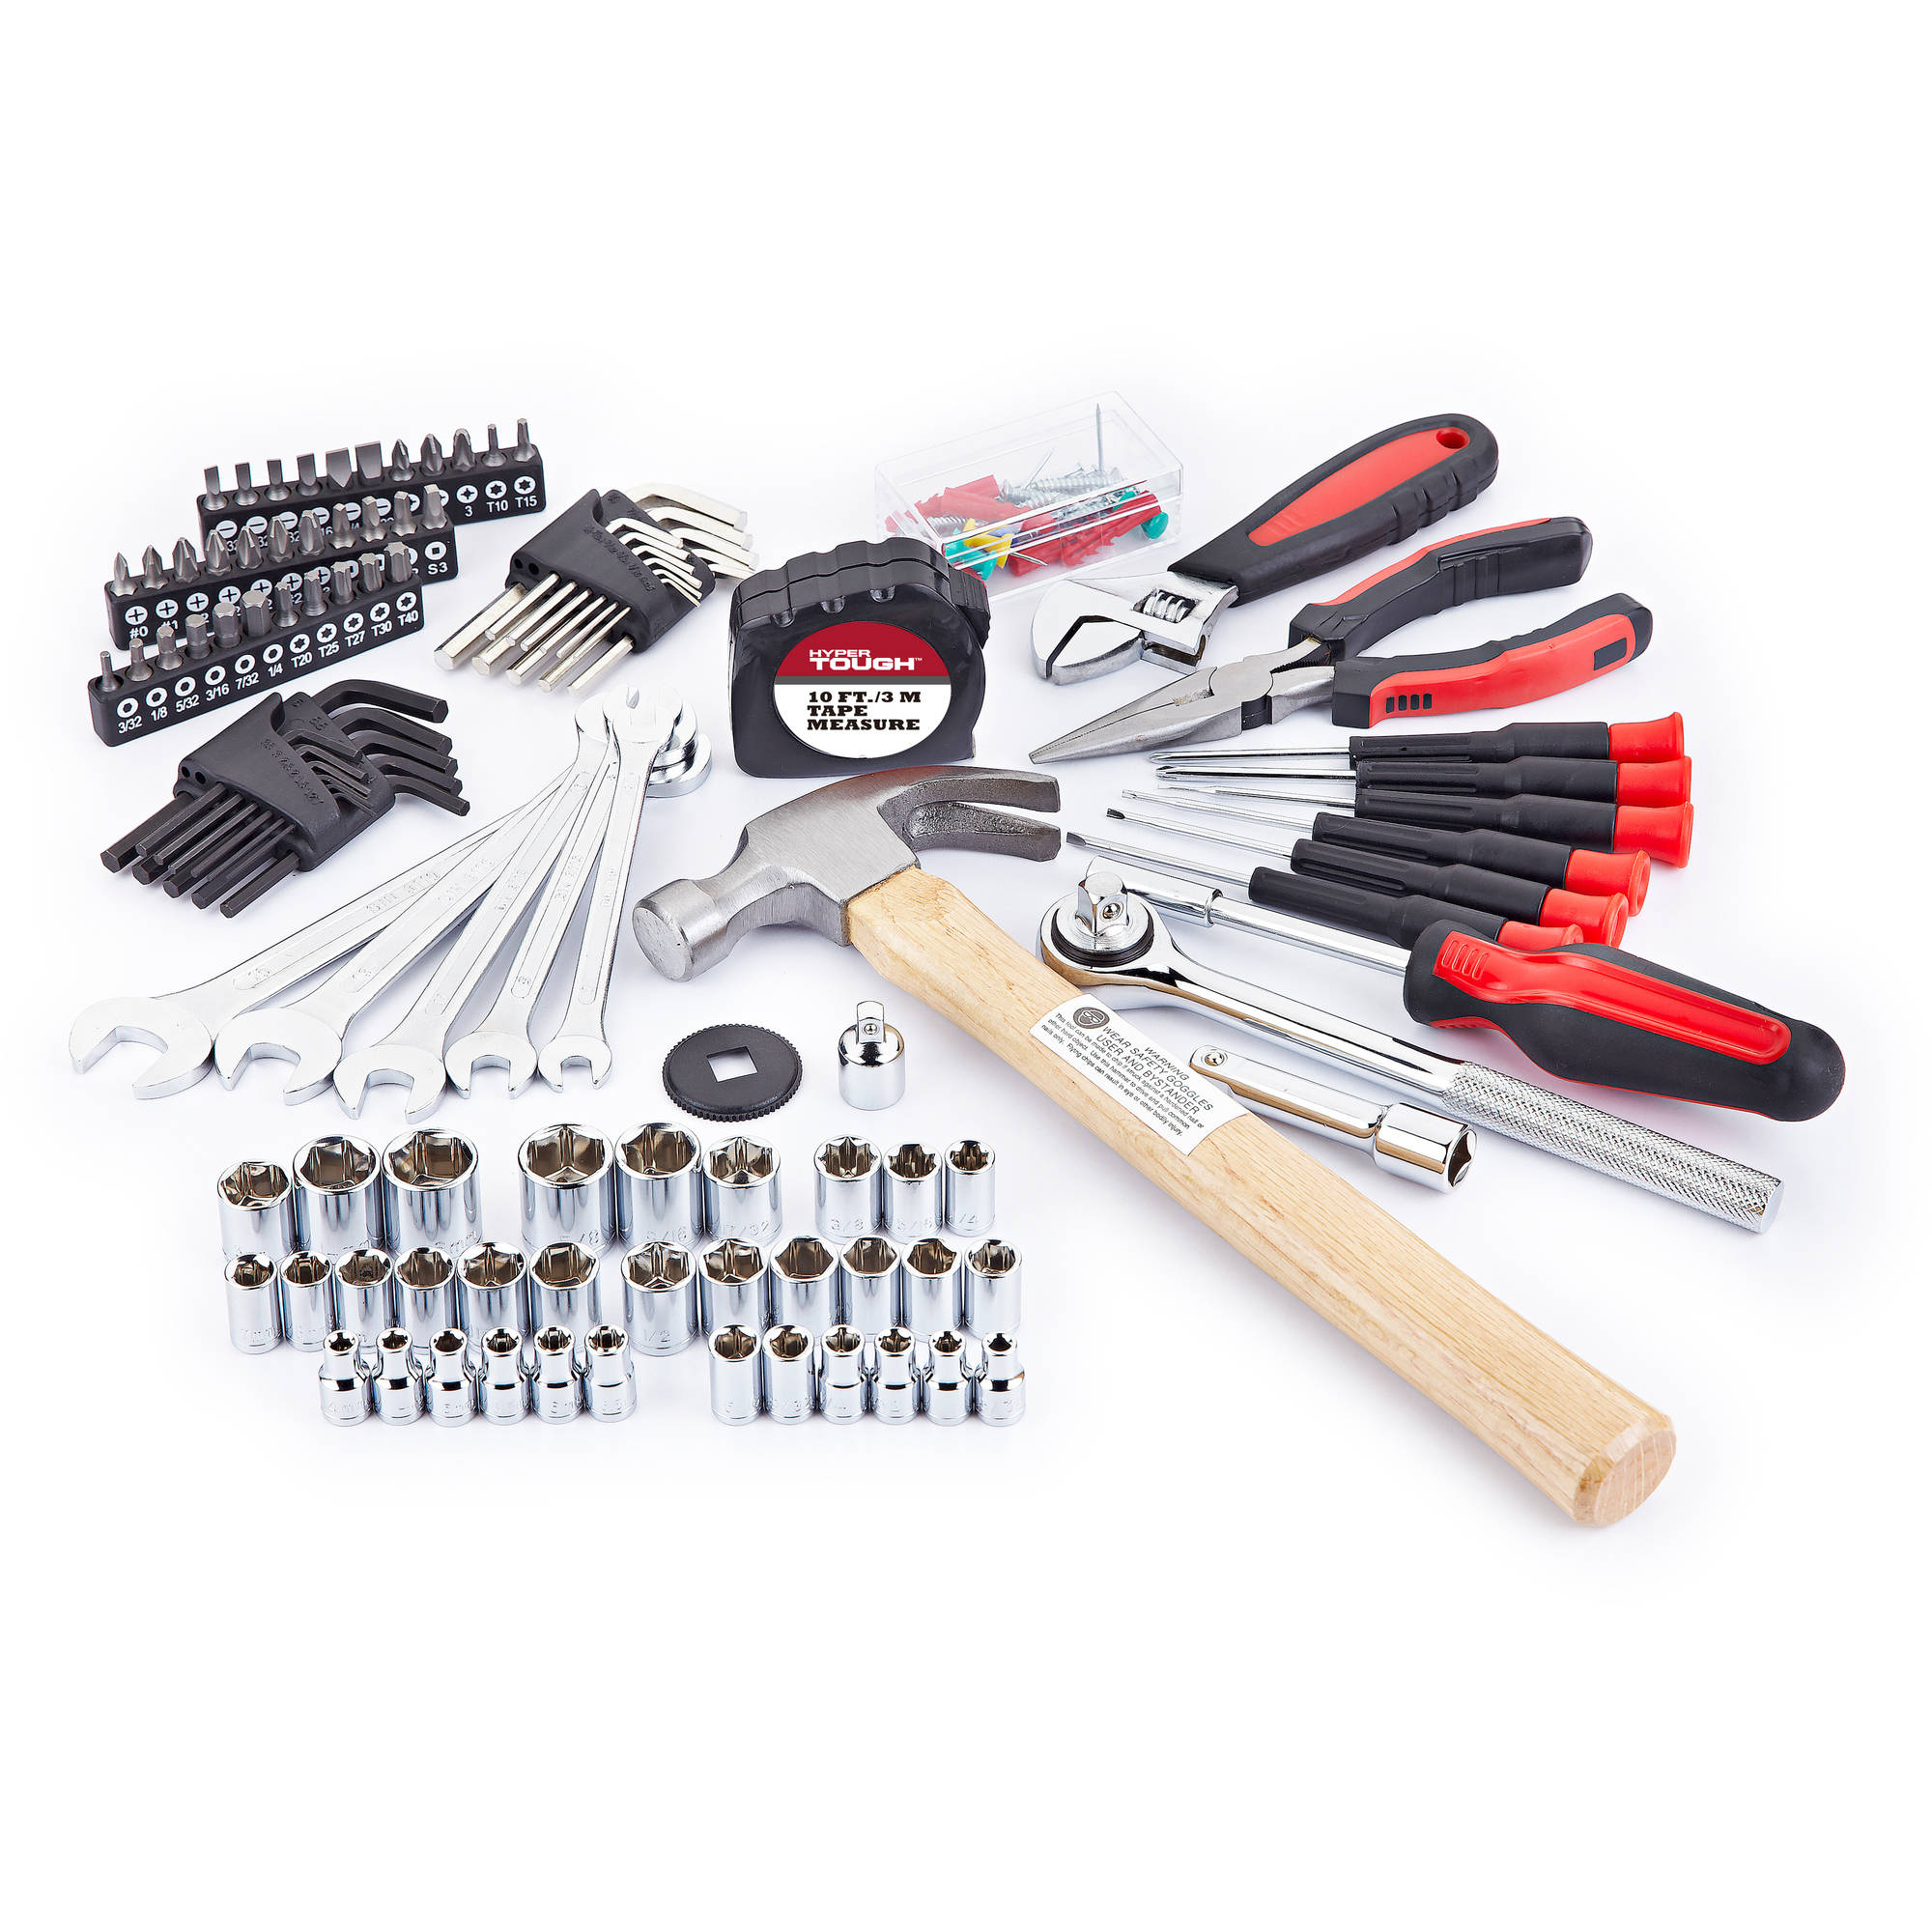 Hyper Tough 110-Piece Home Repair Tool Set With Case - image 2 of 6